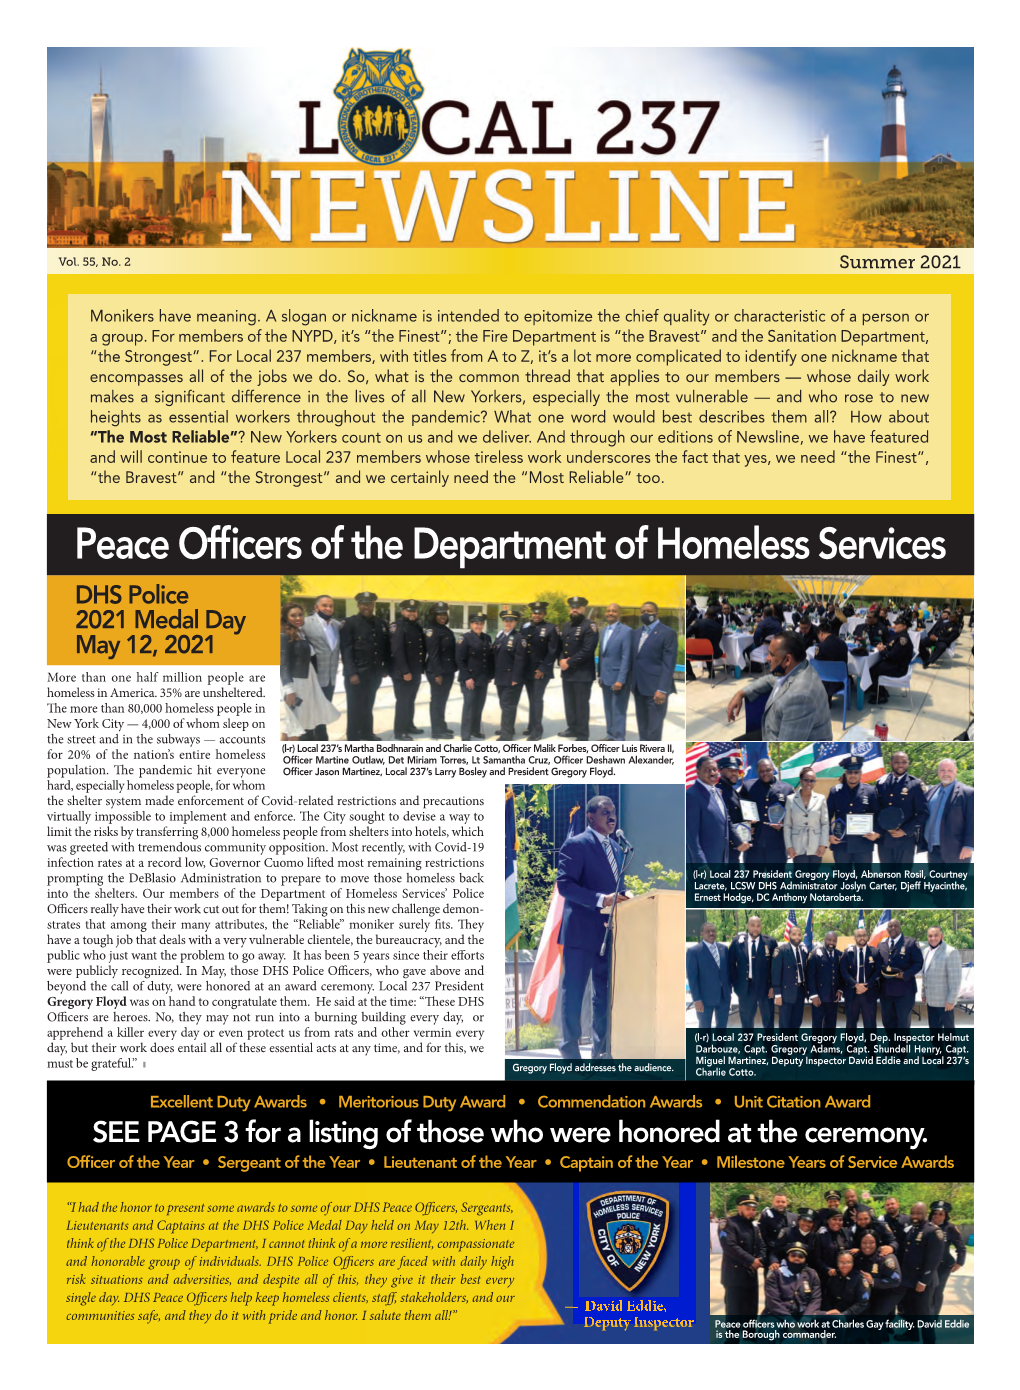 Peace Officers of the Department of Homeless Services